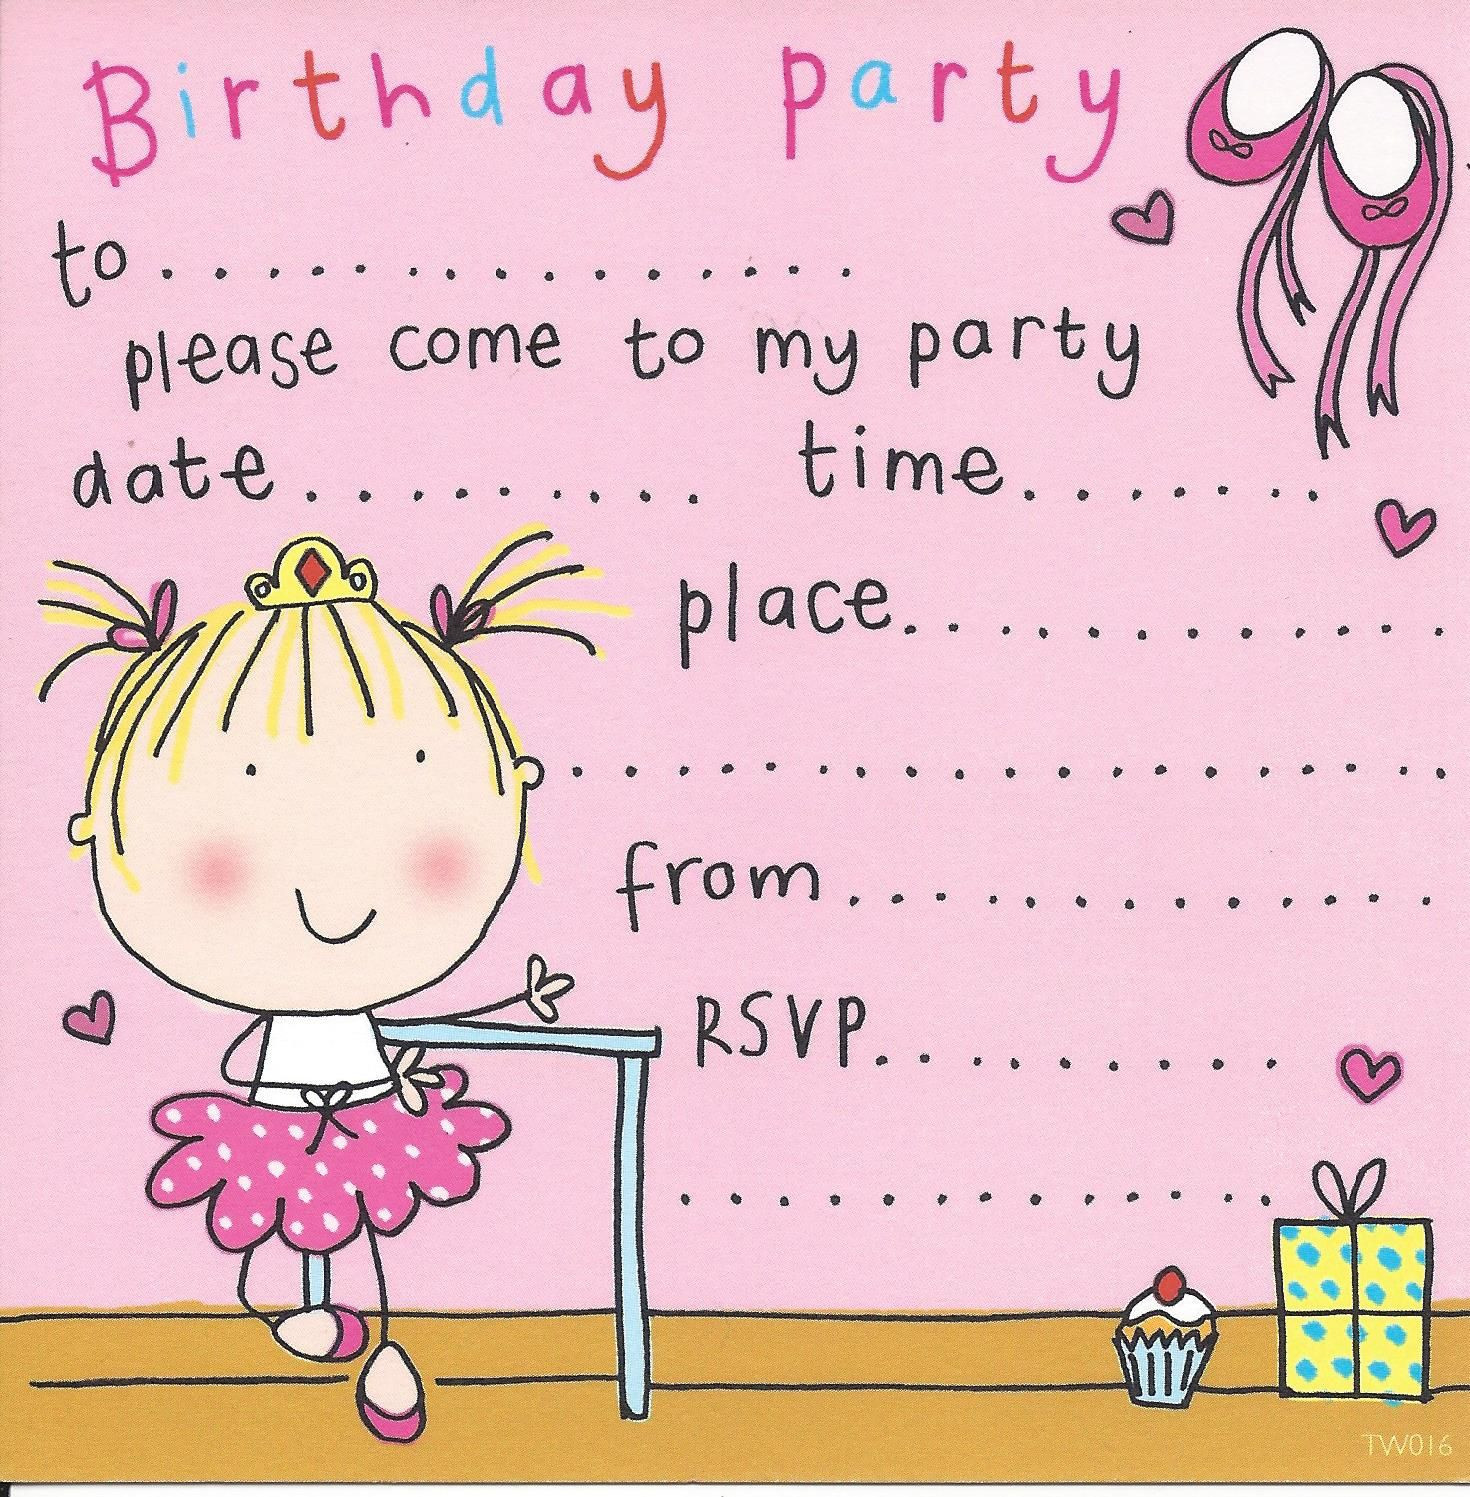 Birthday Invitations For Kids
 party invitations birthday party invitations kids party